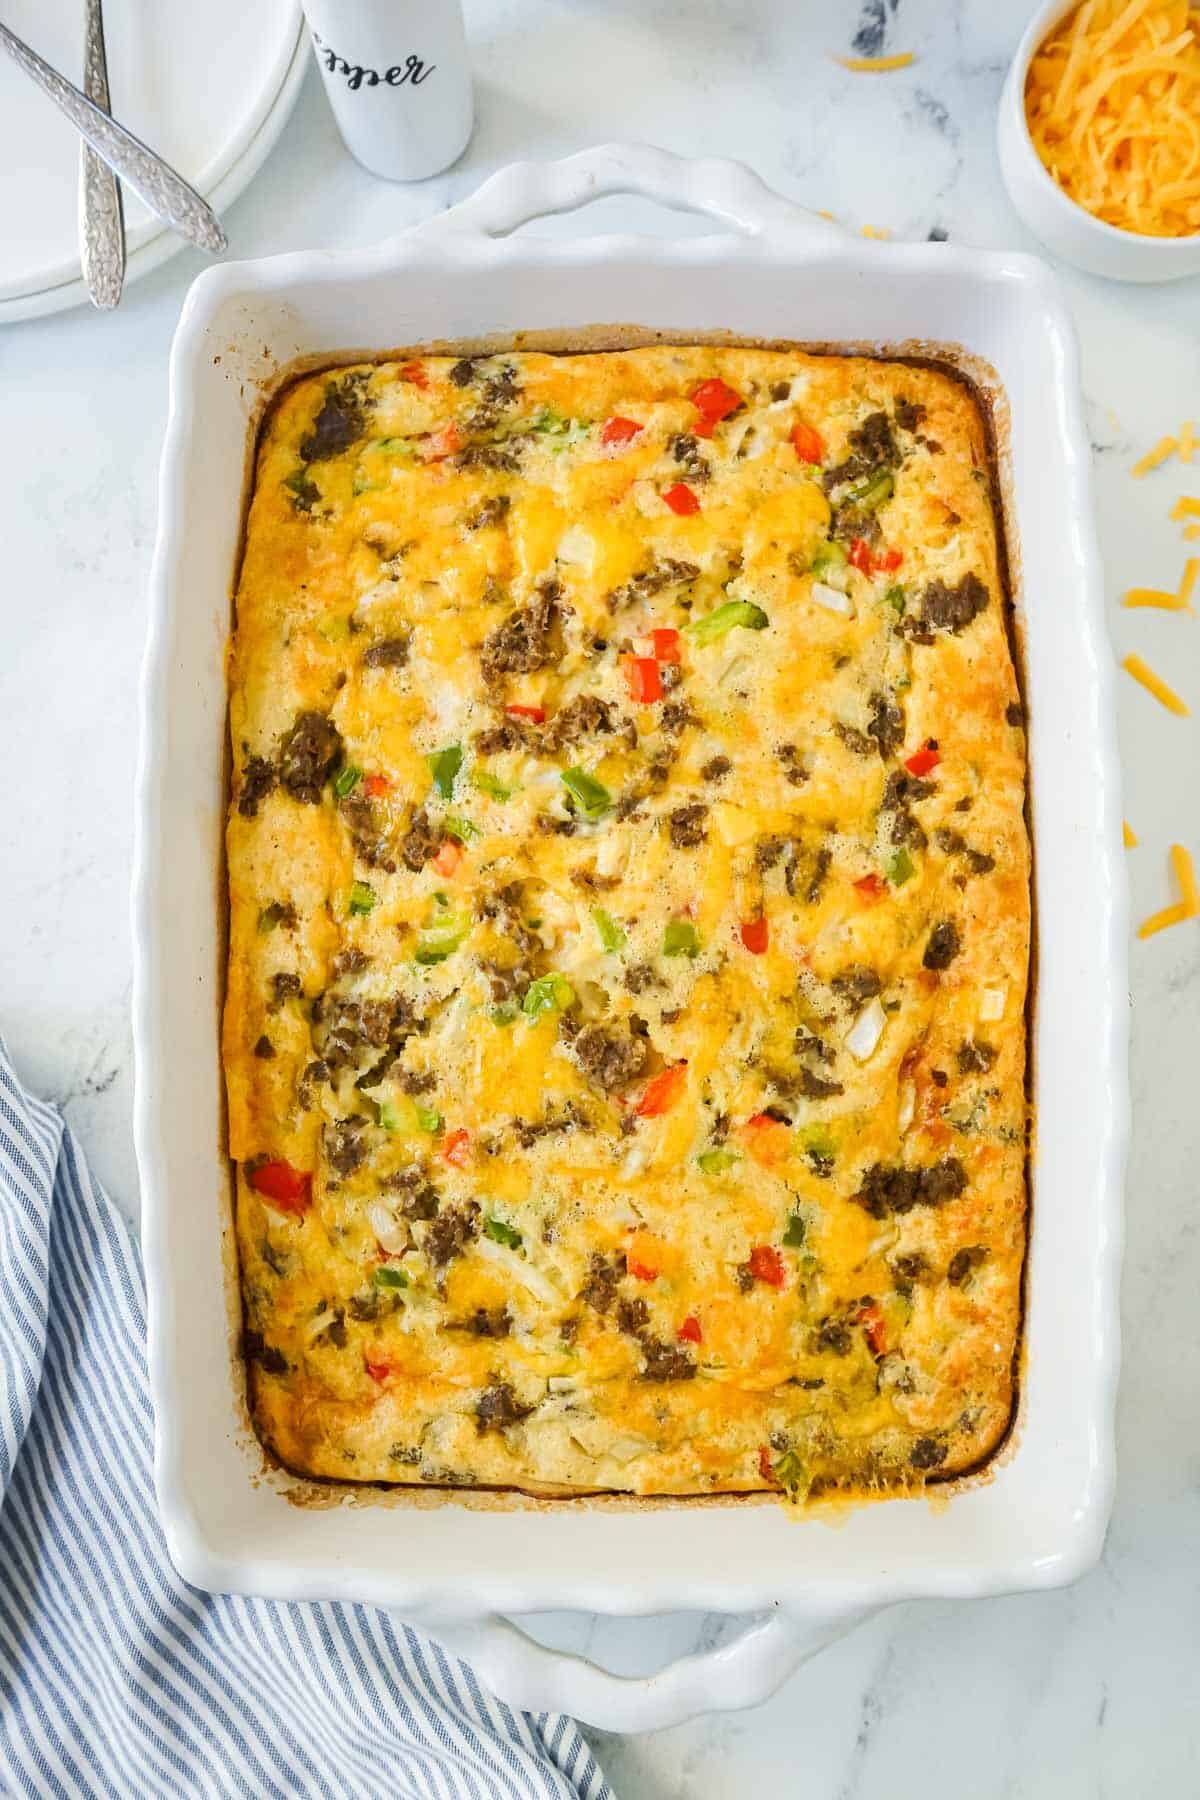 Easy Bisquick Breakfast Casserole right after it's been baked in the oven.